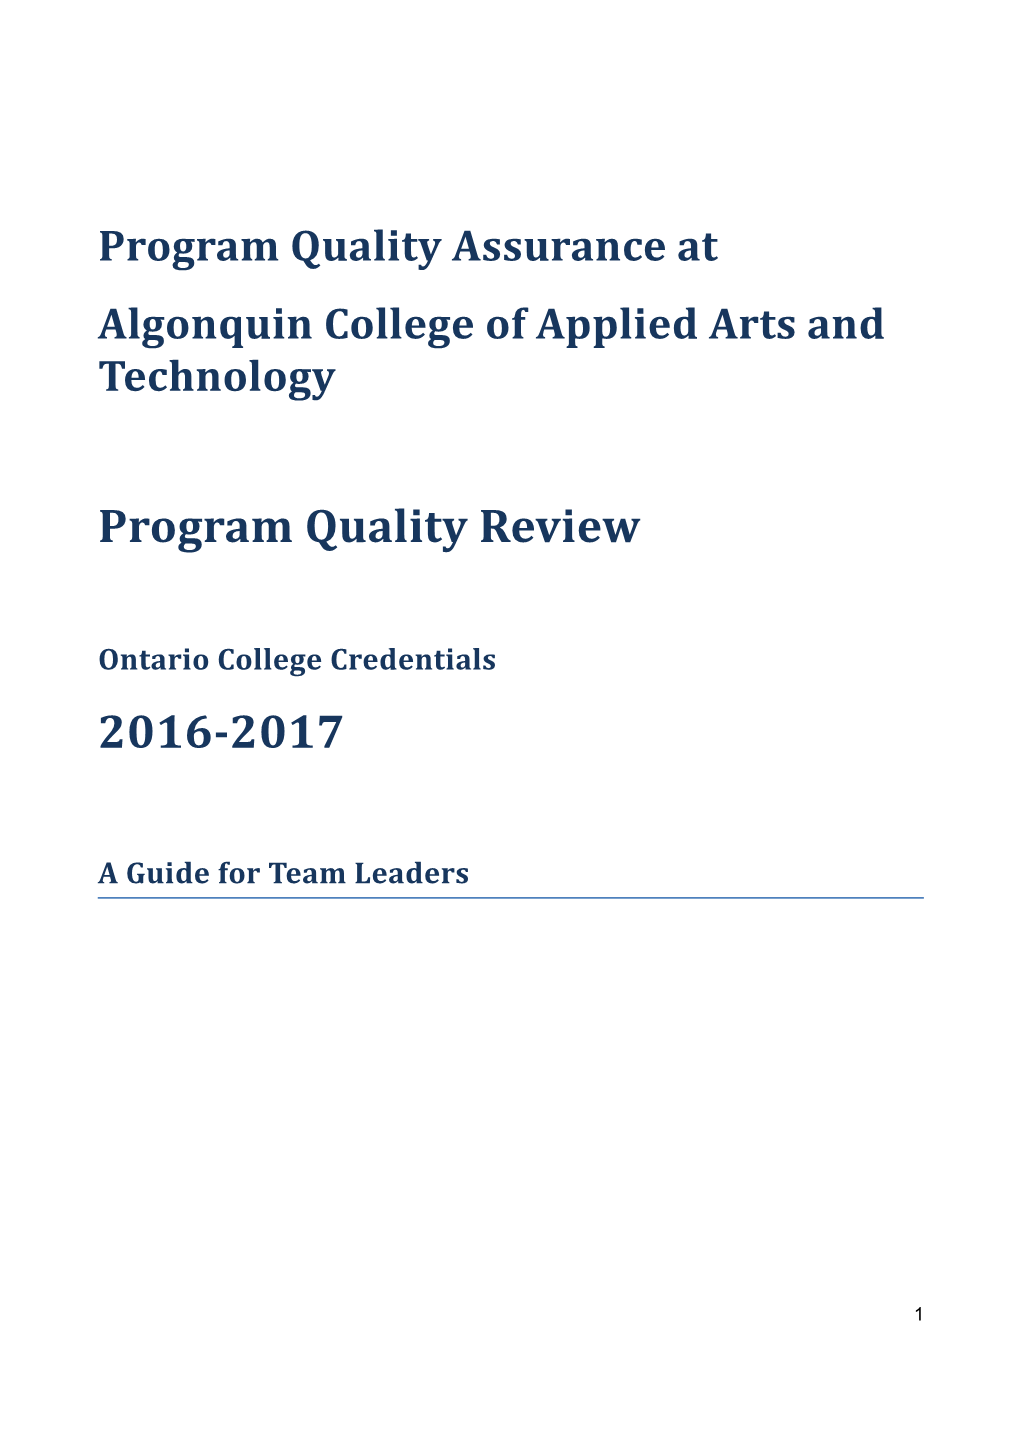 Program Quality Assurance at Algonquin College of Applied Arts and Technology